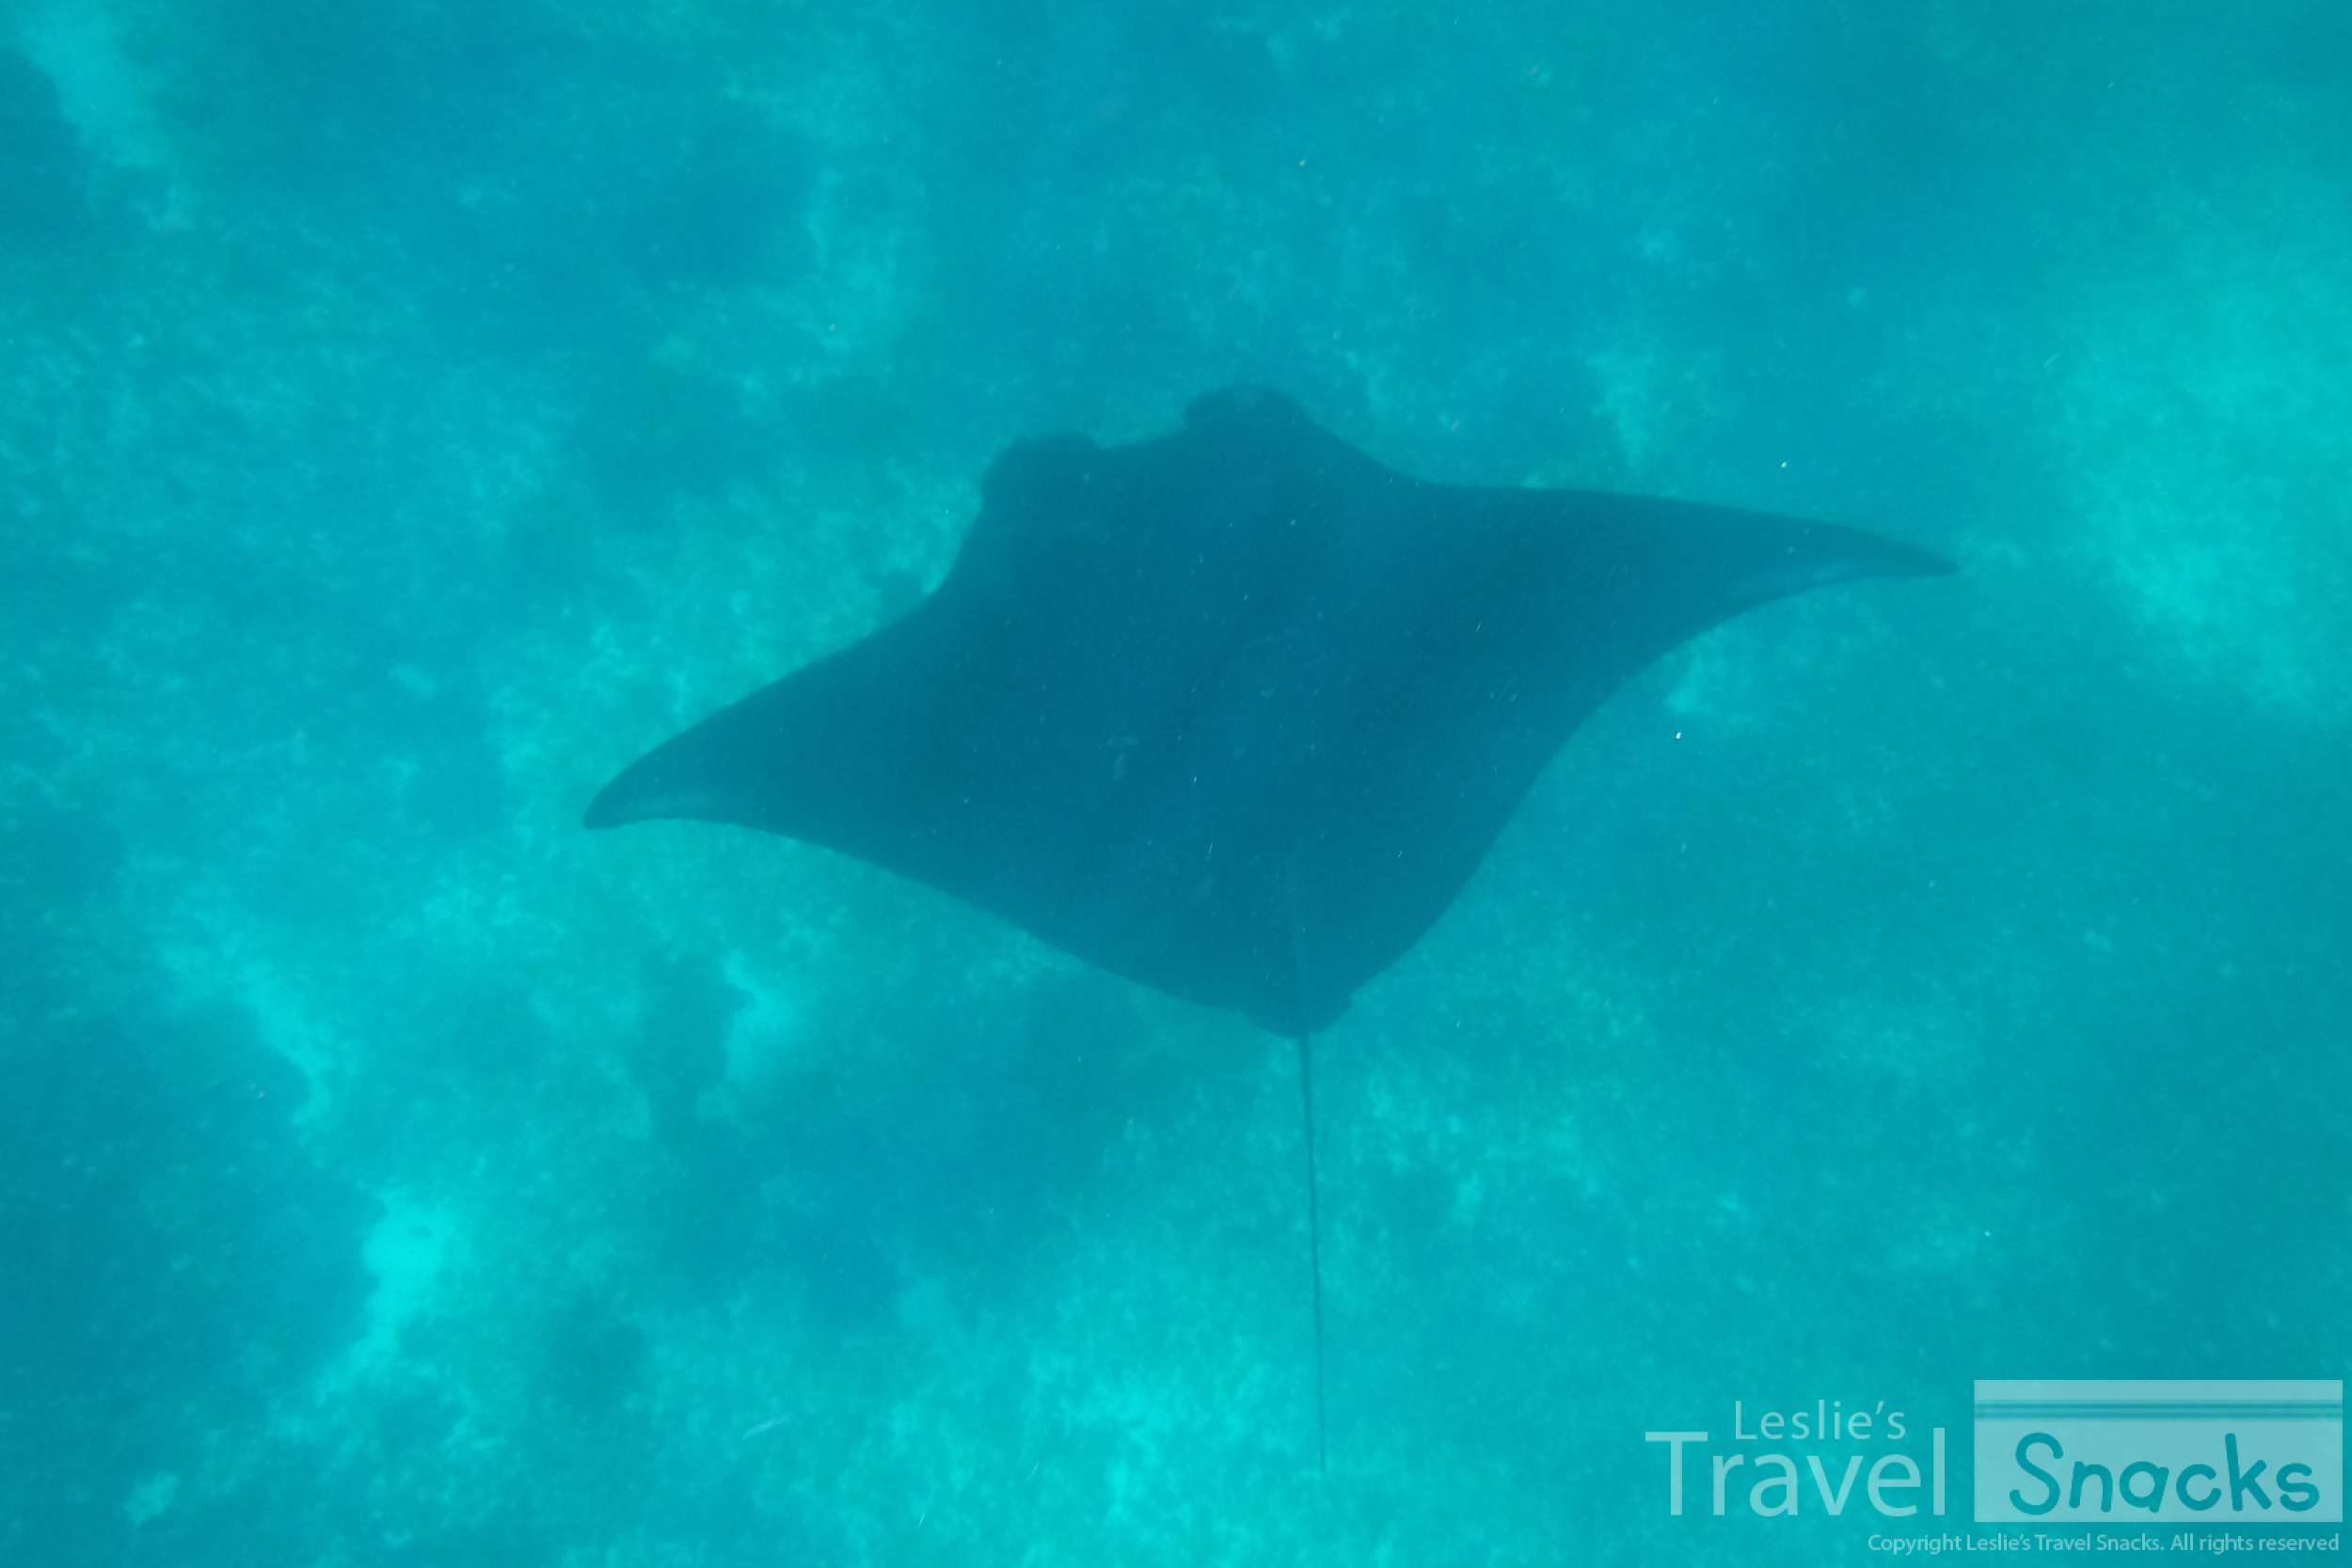 One of the mantas I got to hang out with near our boat.